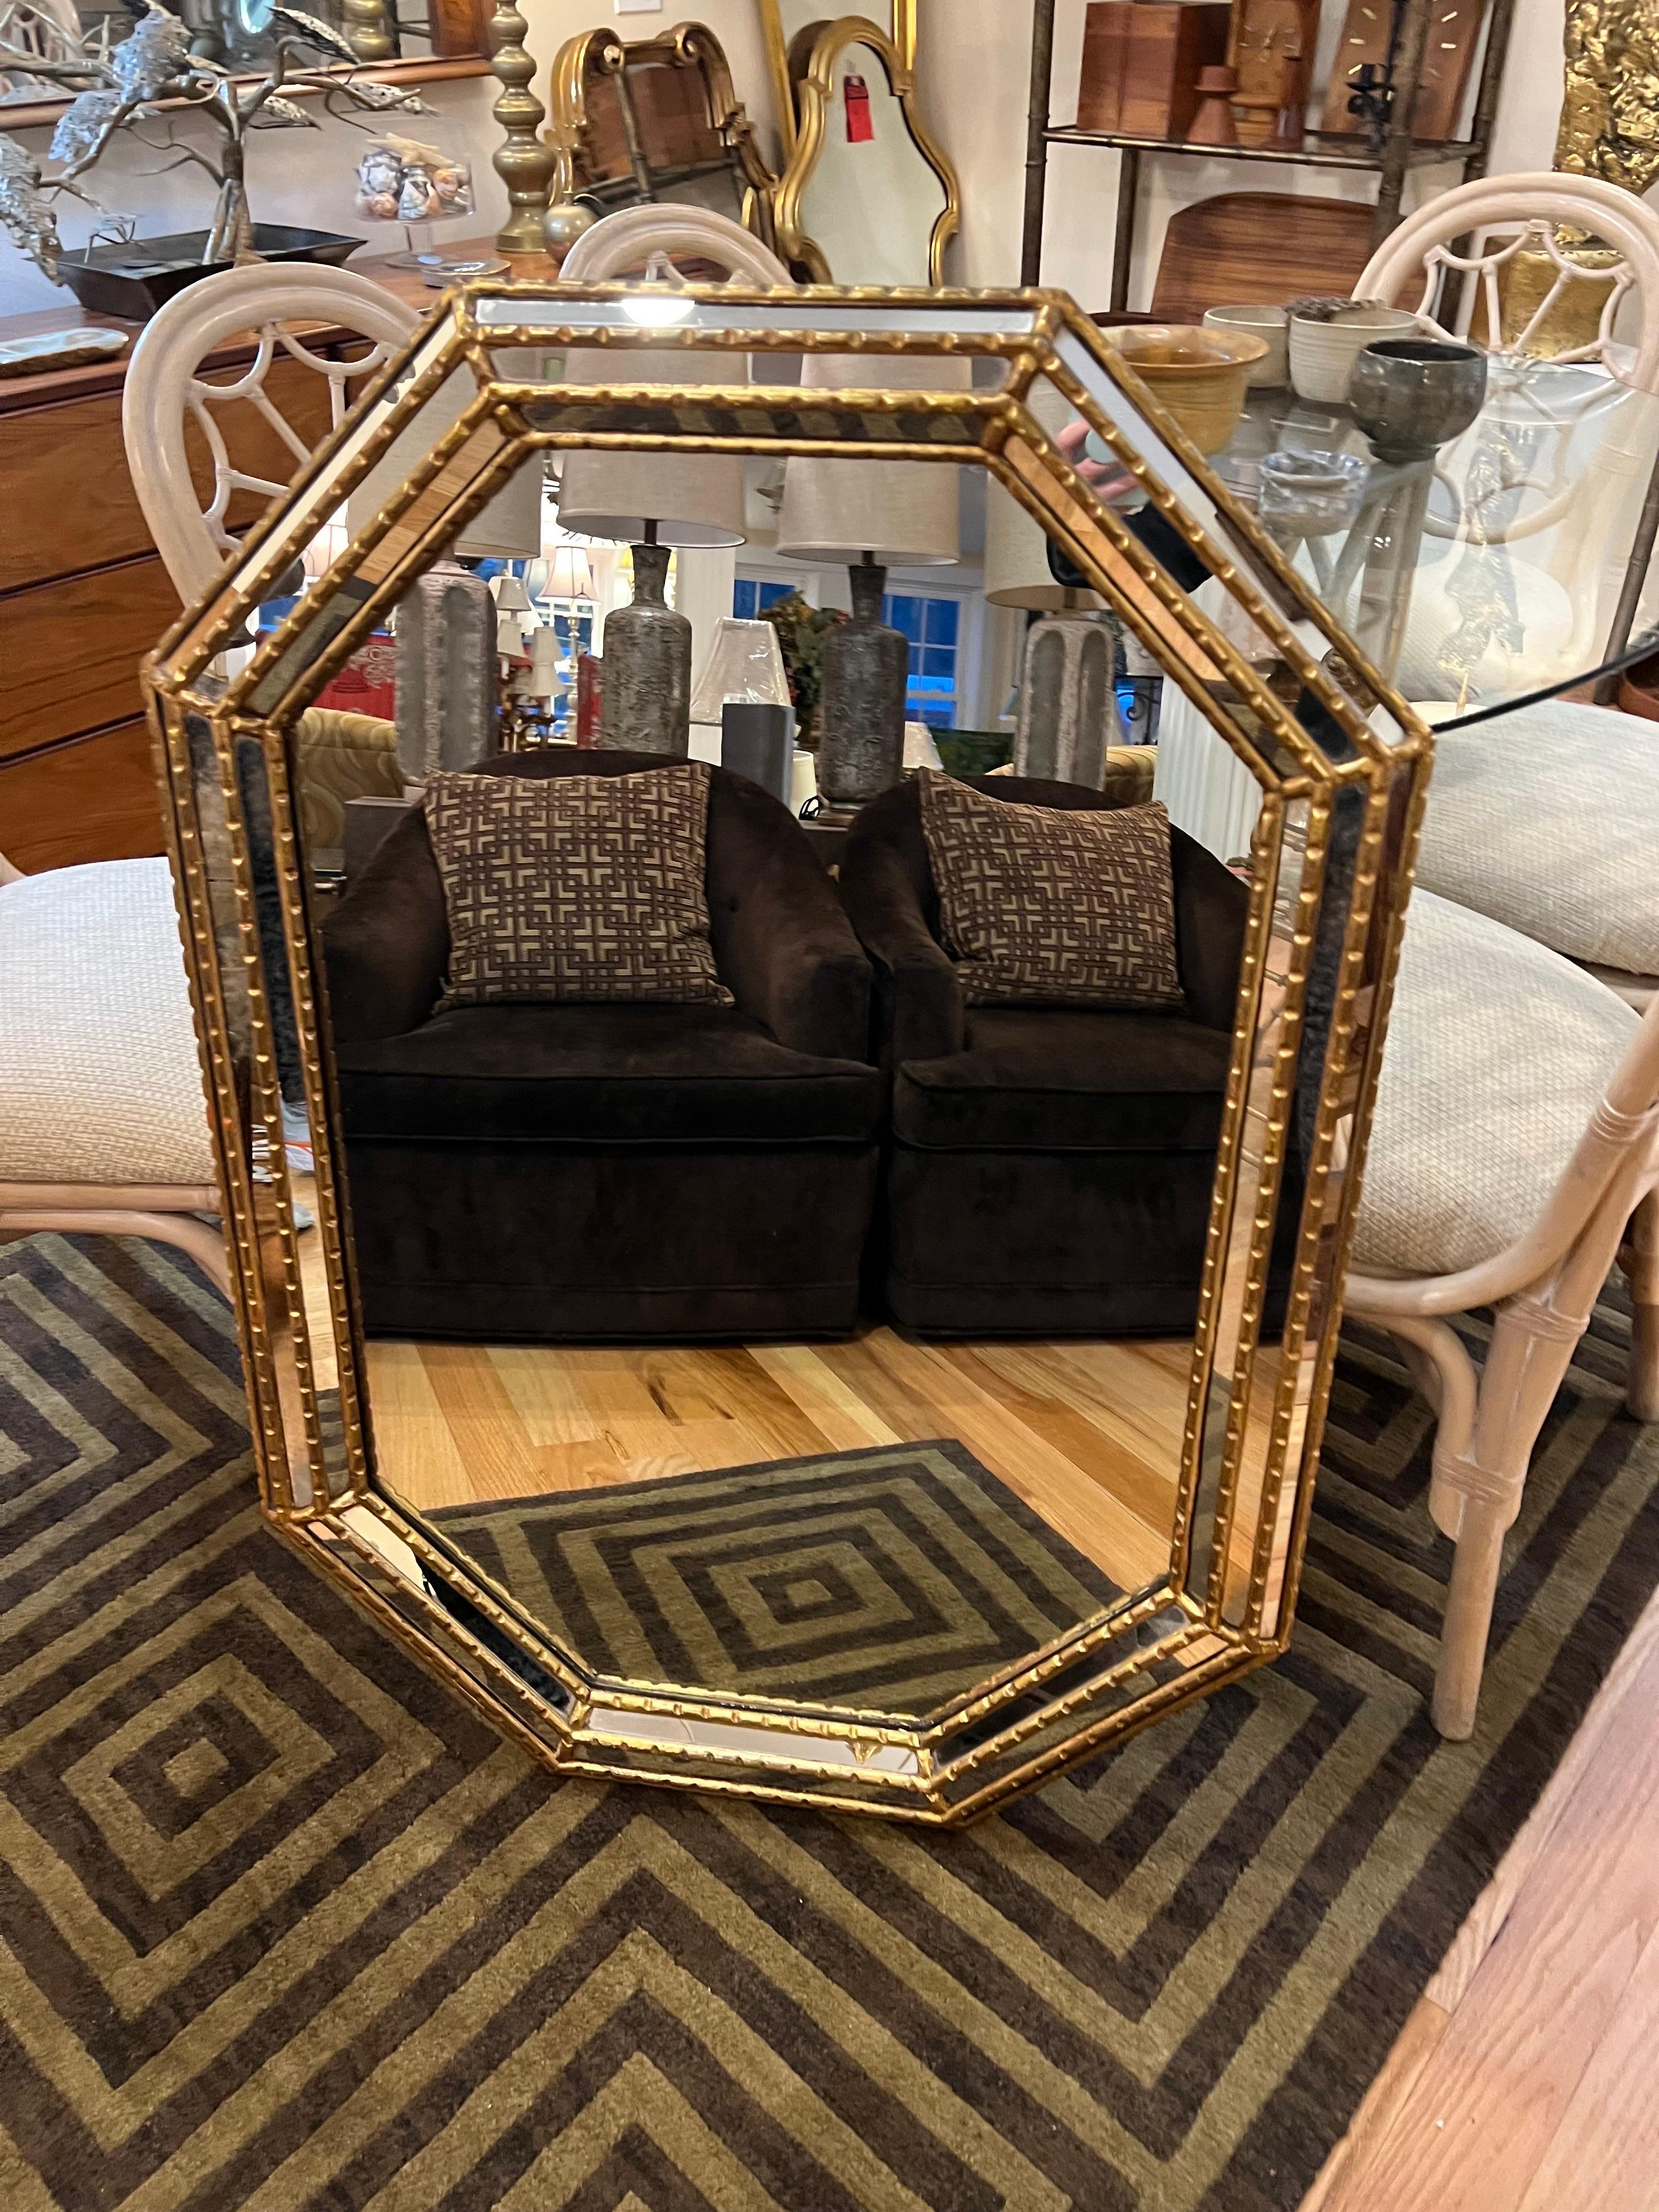 Labarge style octagonal gilt mirror. Thick triple Beveled edges and wide frame make up this beauty. Interesting octagonal shape. Perfect for a hallway or above a vanity.
Solid wood and very well made piece. Back when they made things right and they